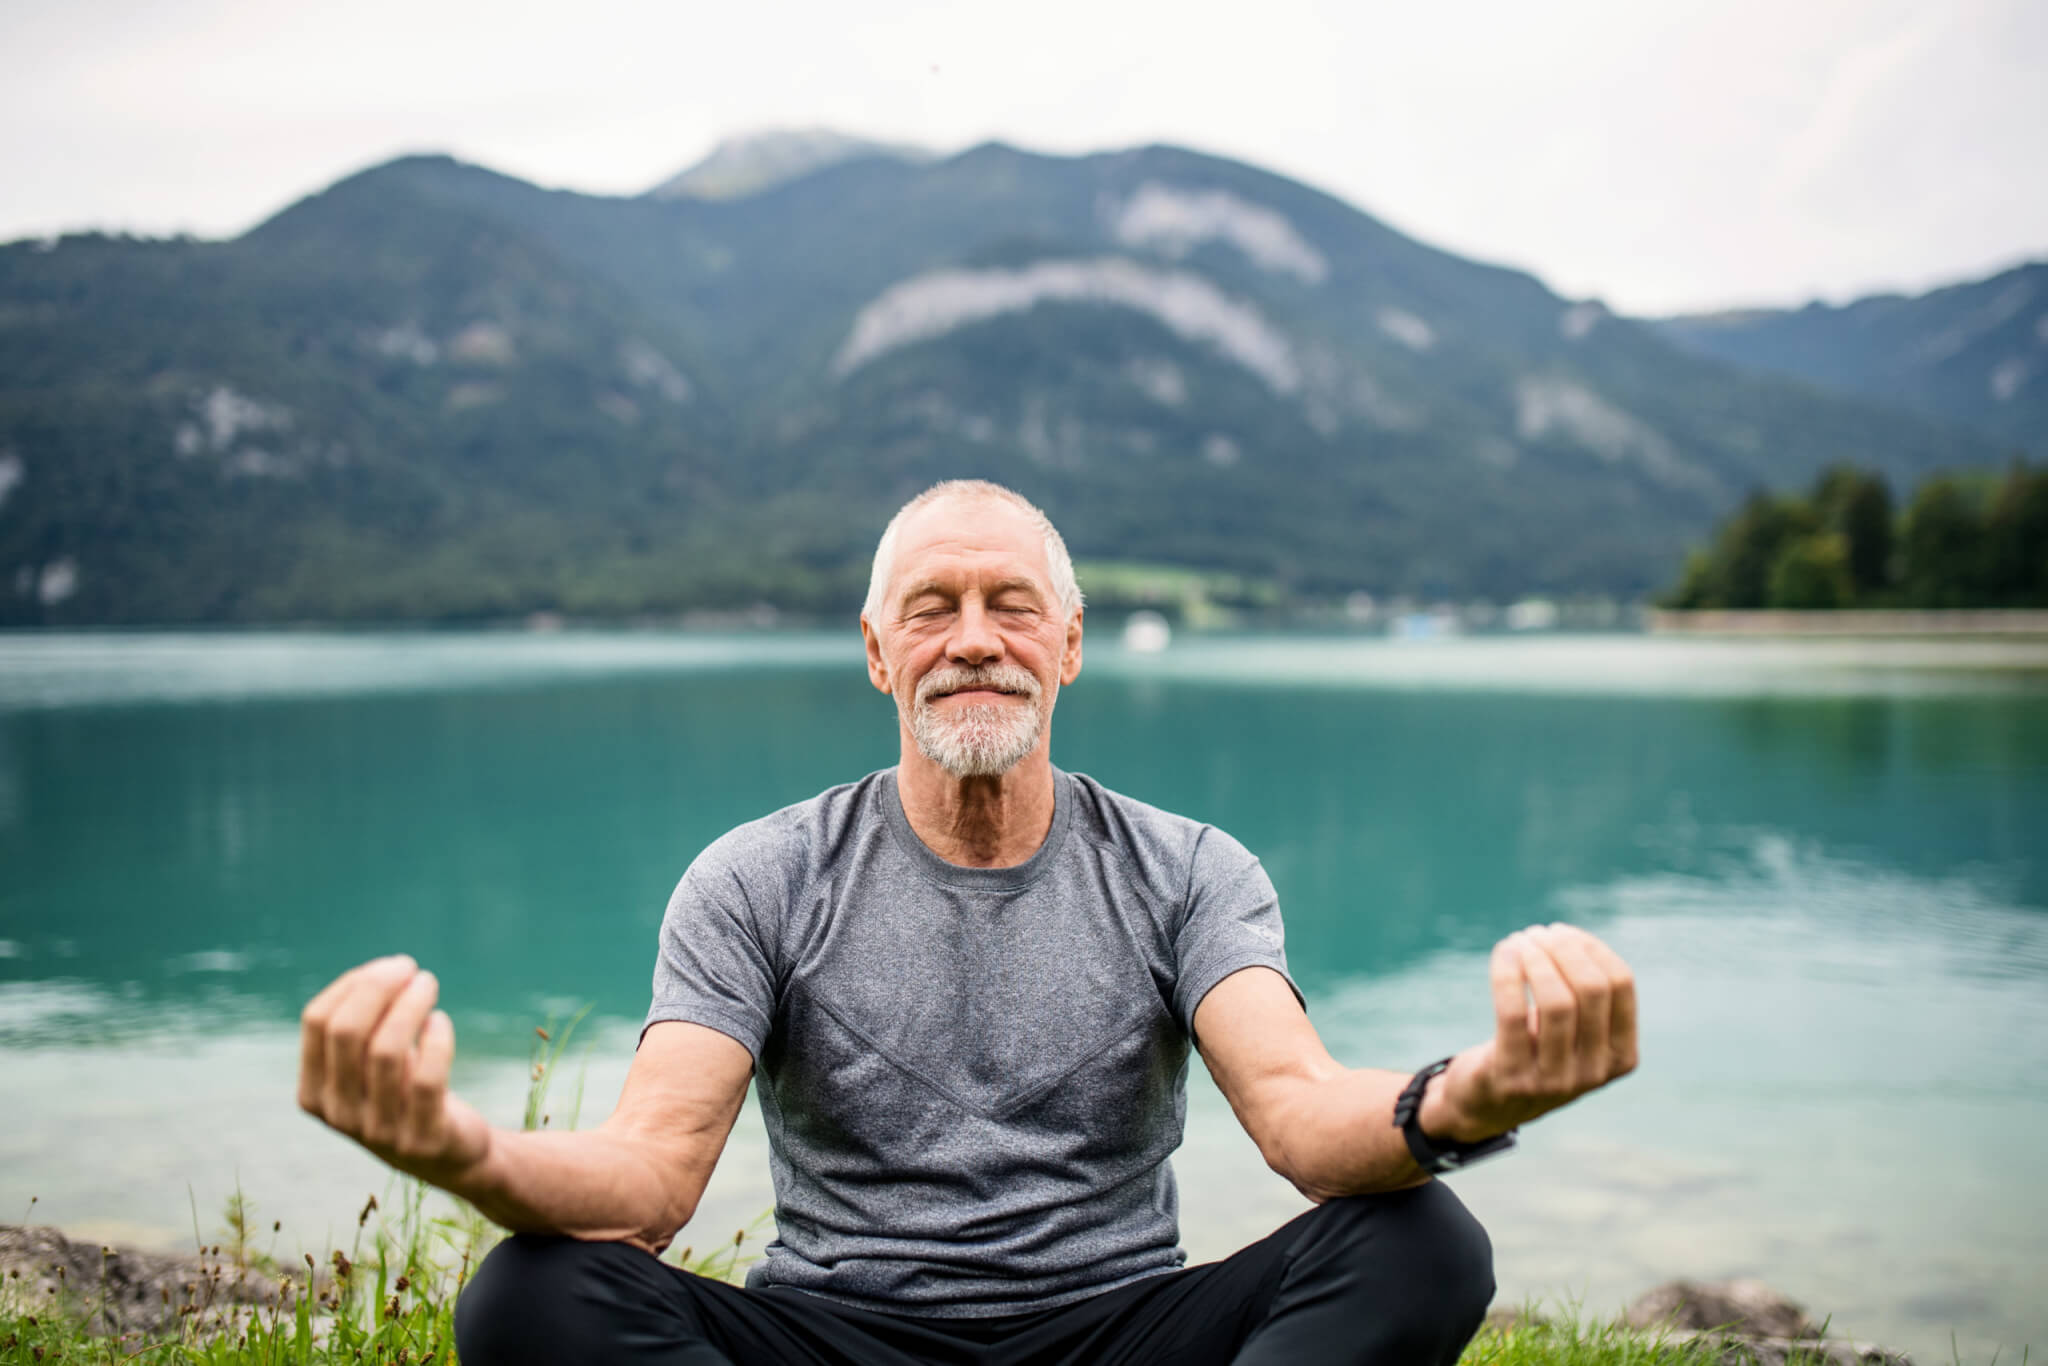 Meditating each day activates genes that fight off cancer and viruses like COVID-19 - Study Finds